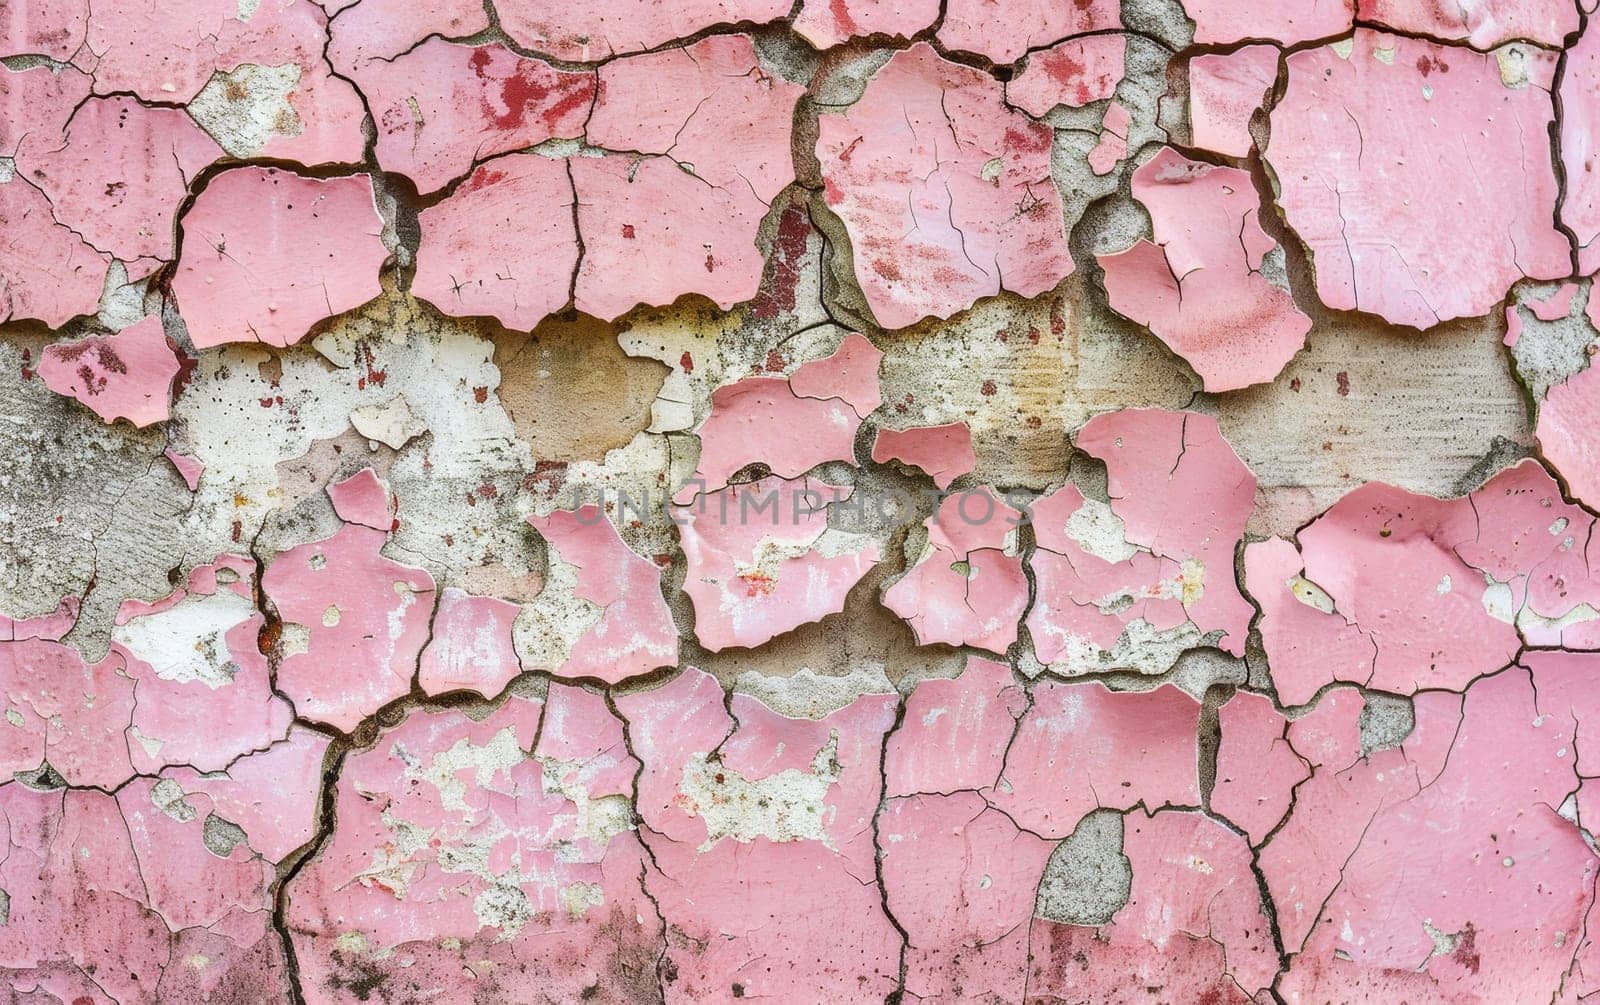 The weathered texture of a pink wall reveals layers of history and neglect, standing as a rugged canvas of urban time